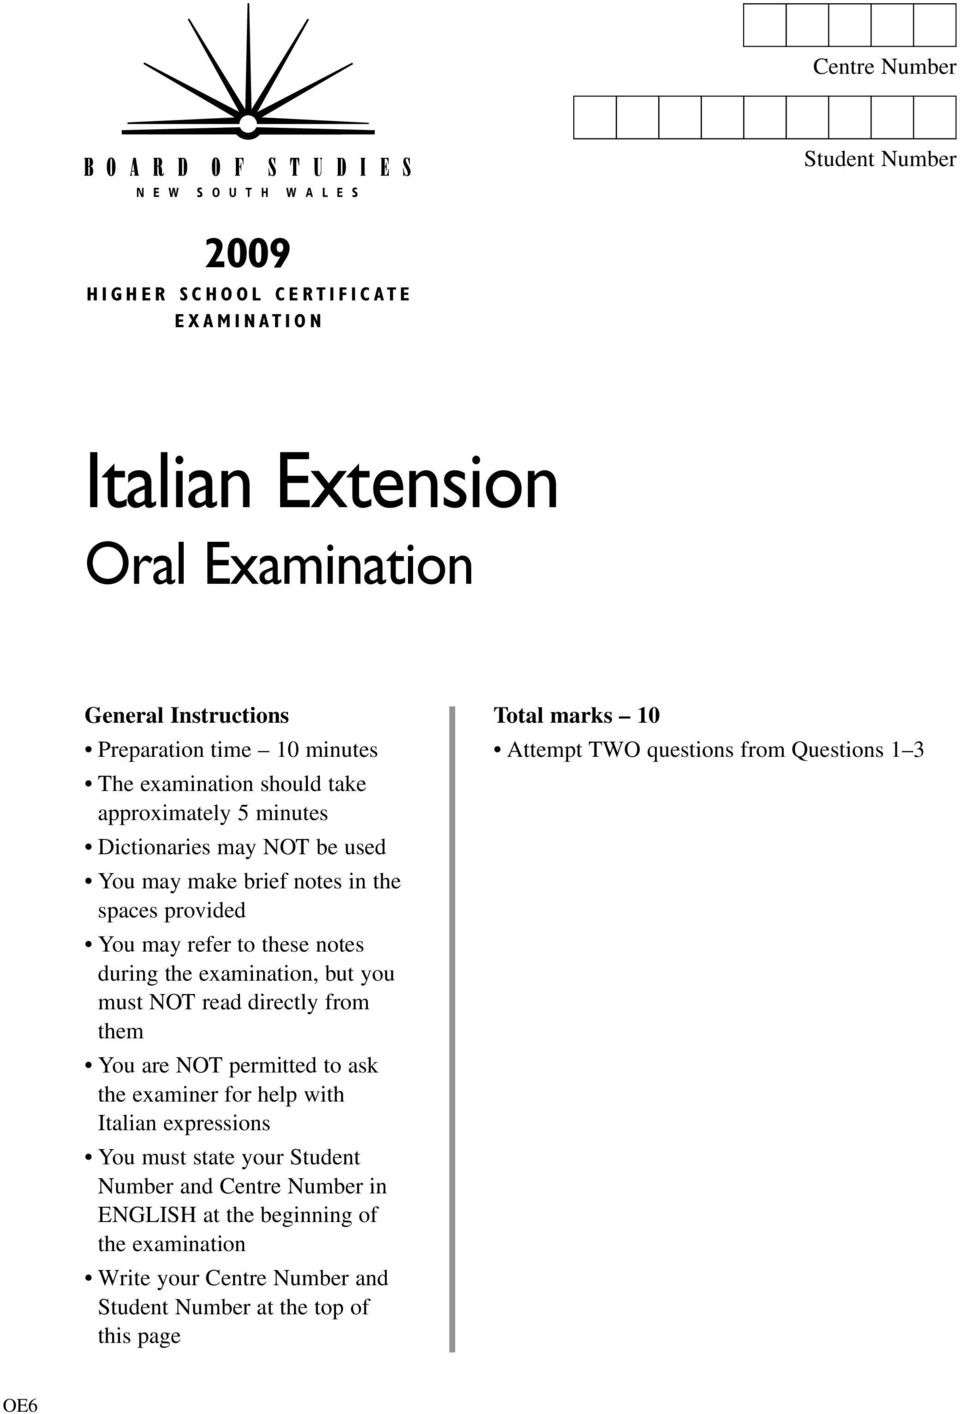 examination, but you must NOT read directly from them You are NOT permitted to ask the examiner for help with Italian expressions You must state your Student Number and